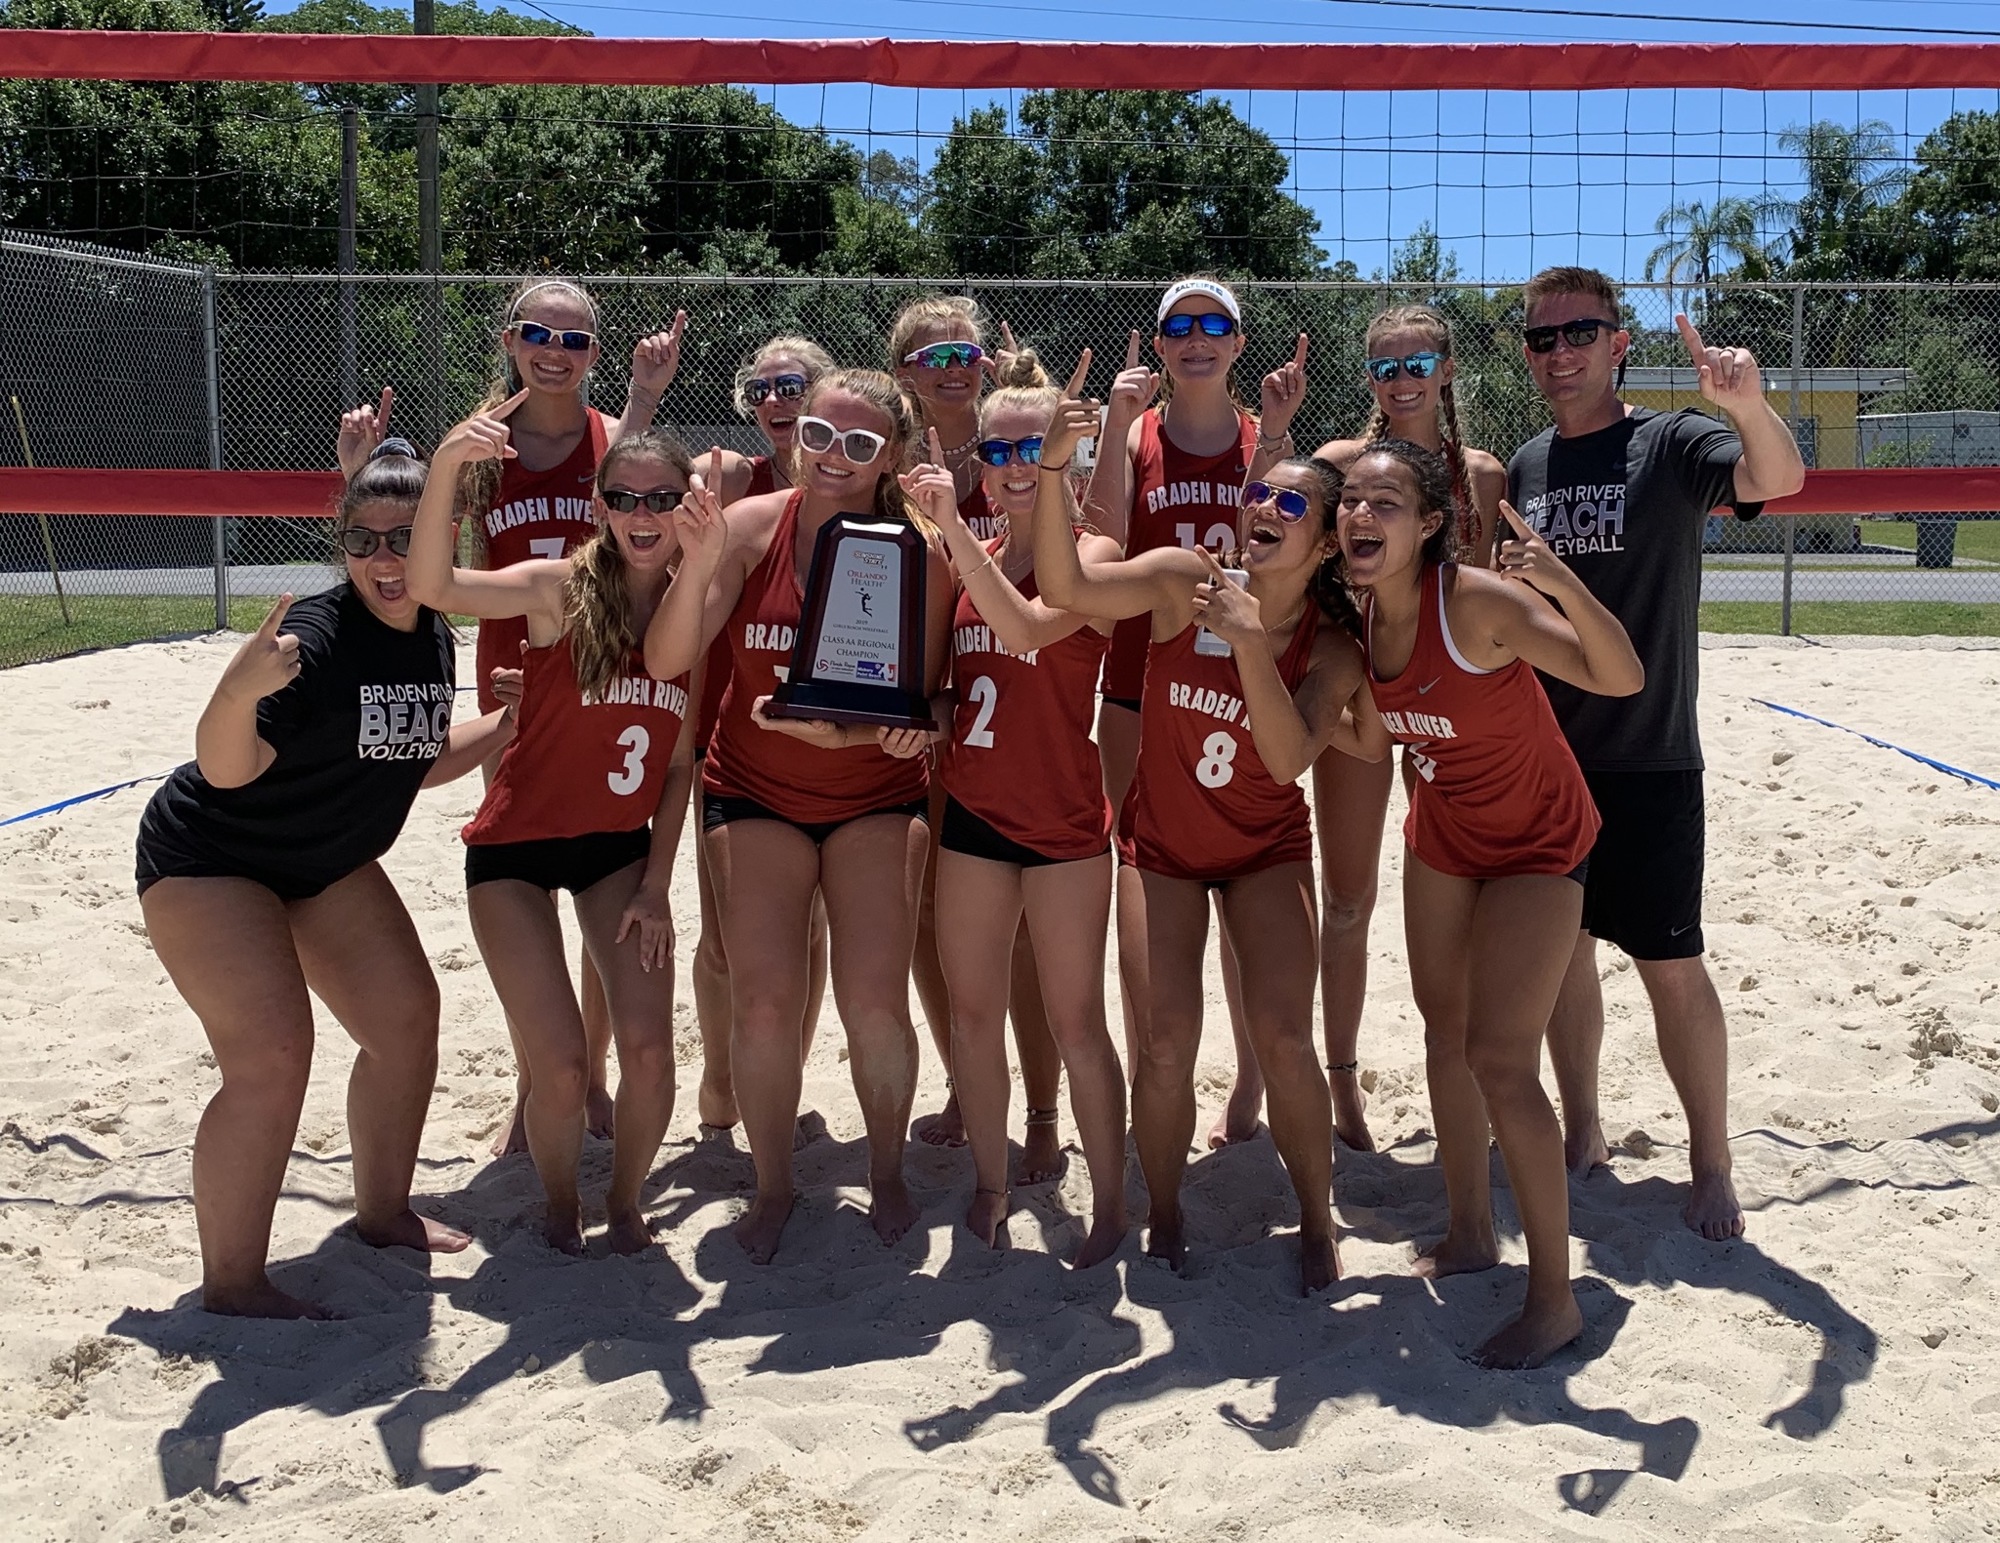 10. The Braden River High beach volleyball team won its regional championship for the second year in a row, and finished third at the state tournament.